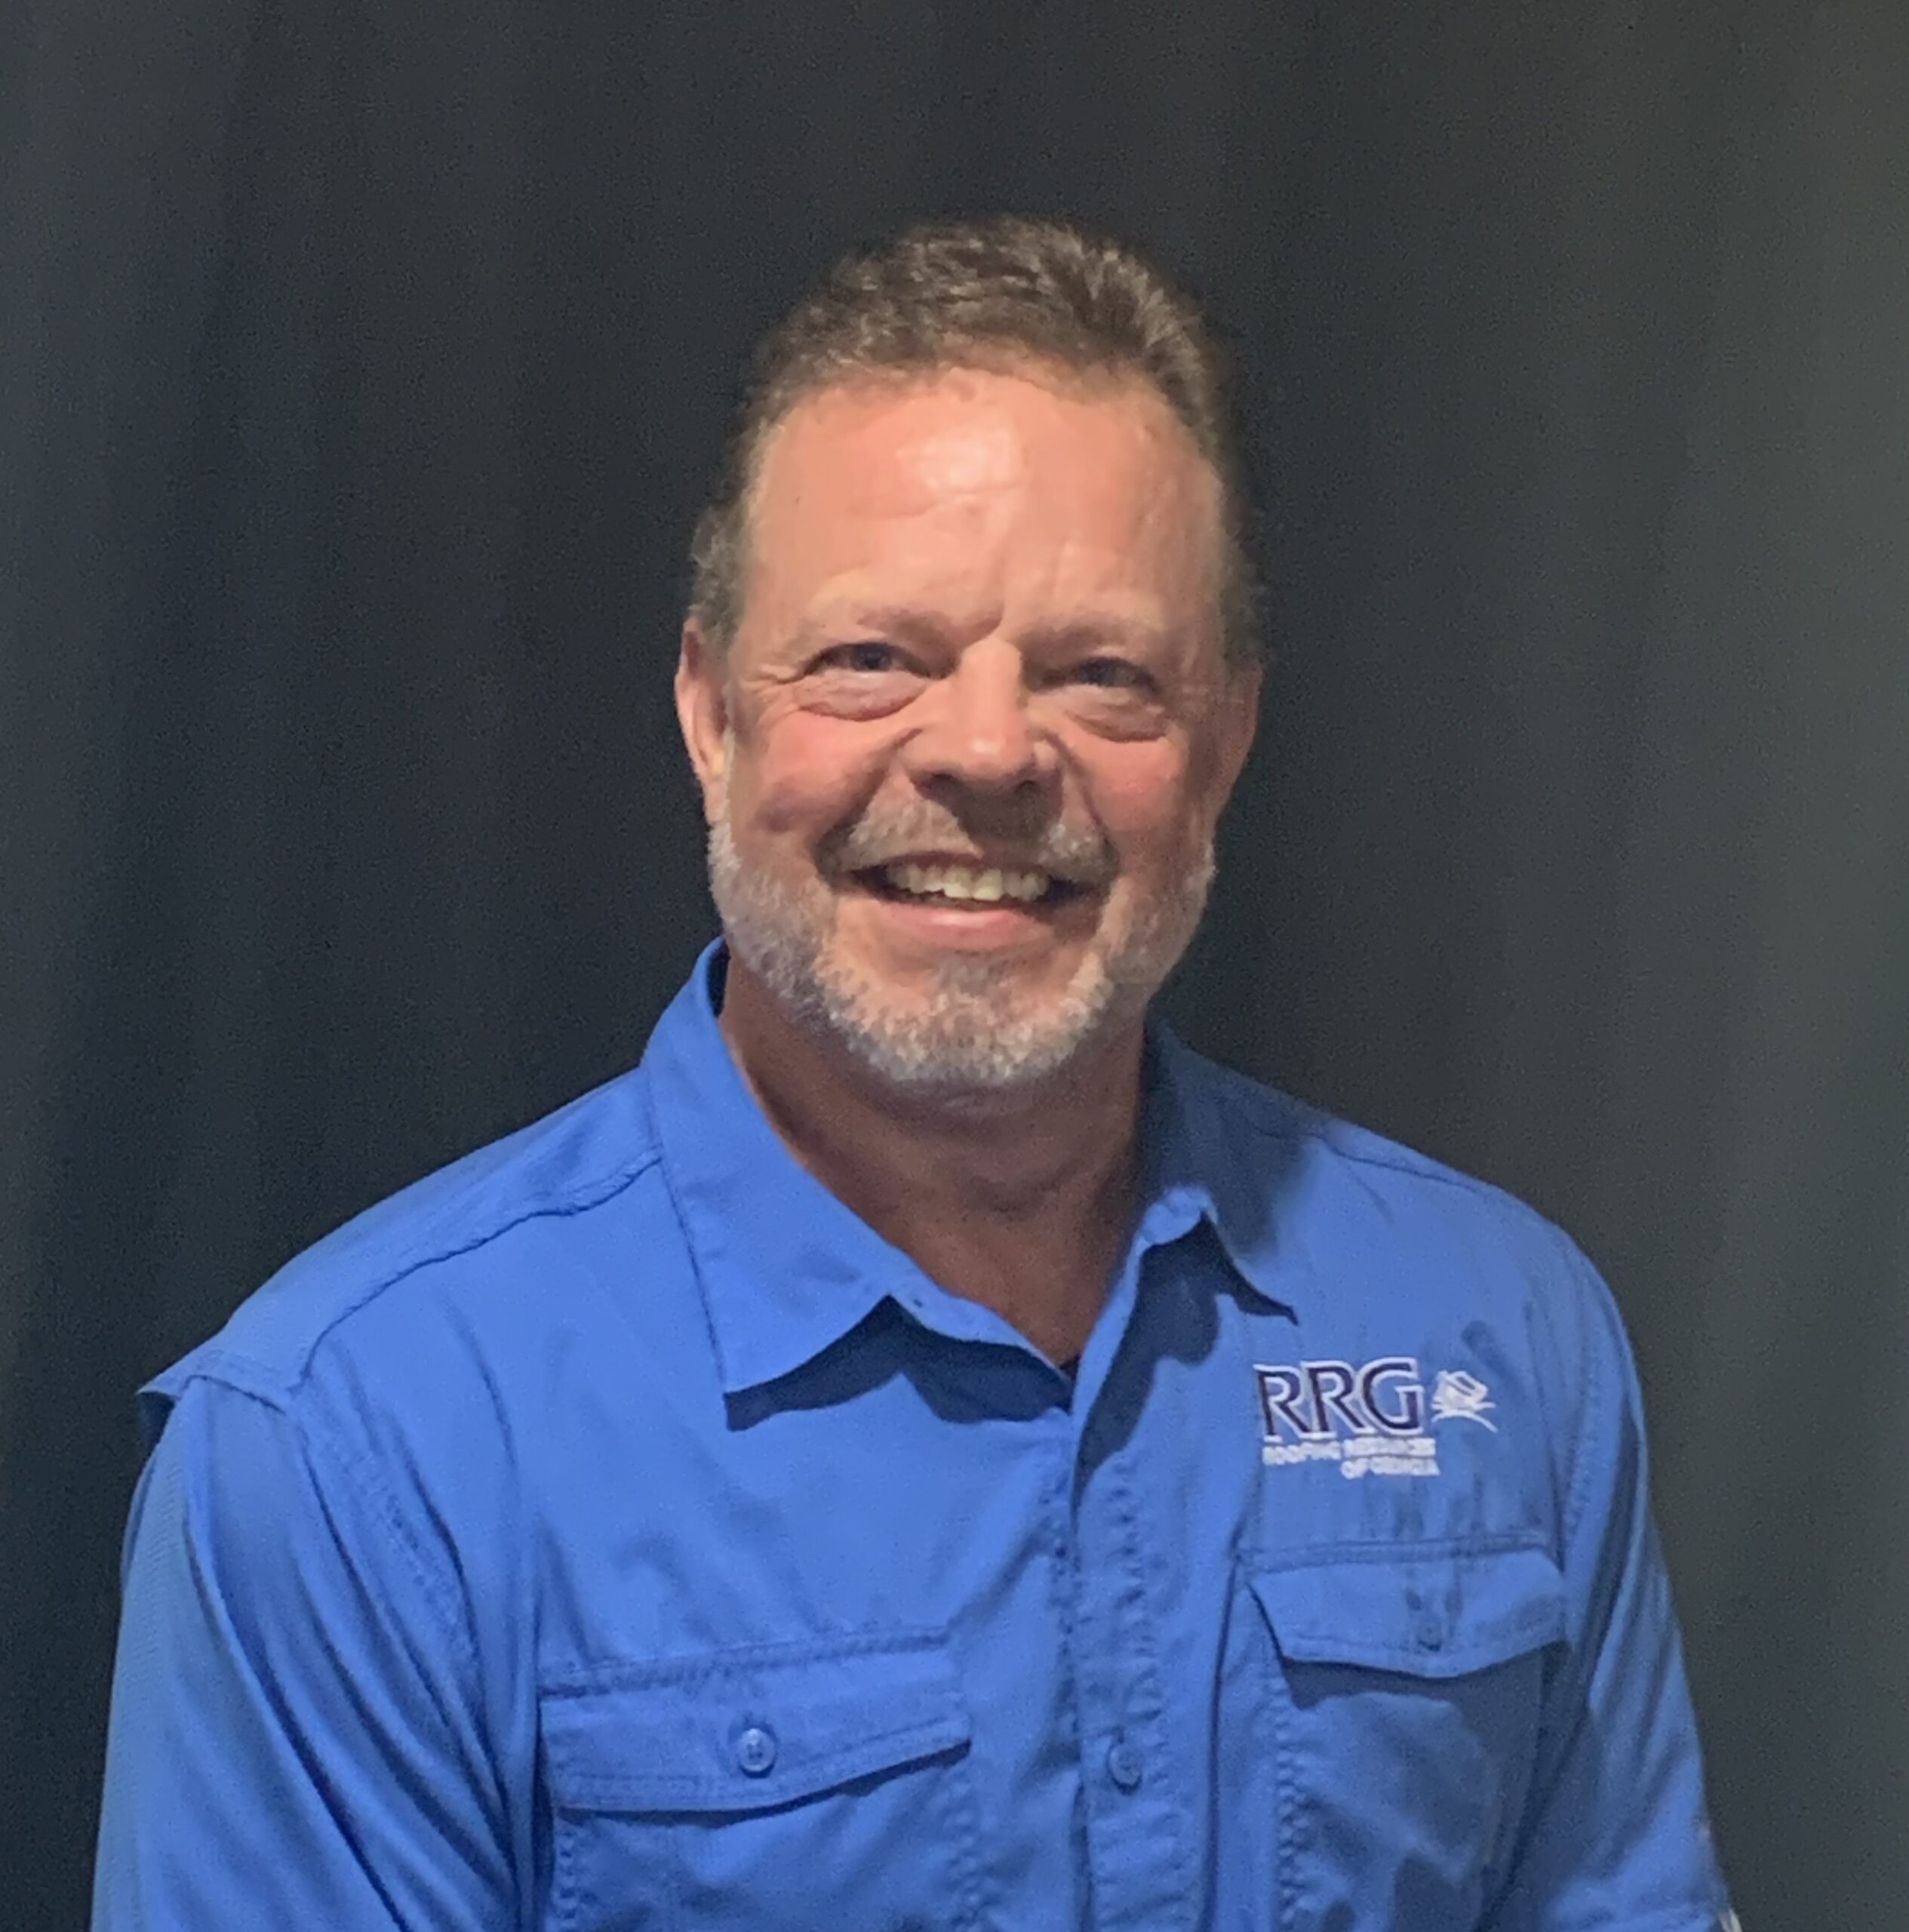 Cary-Rich-Founder-and-CEO RRG Roofing